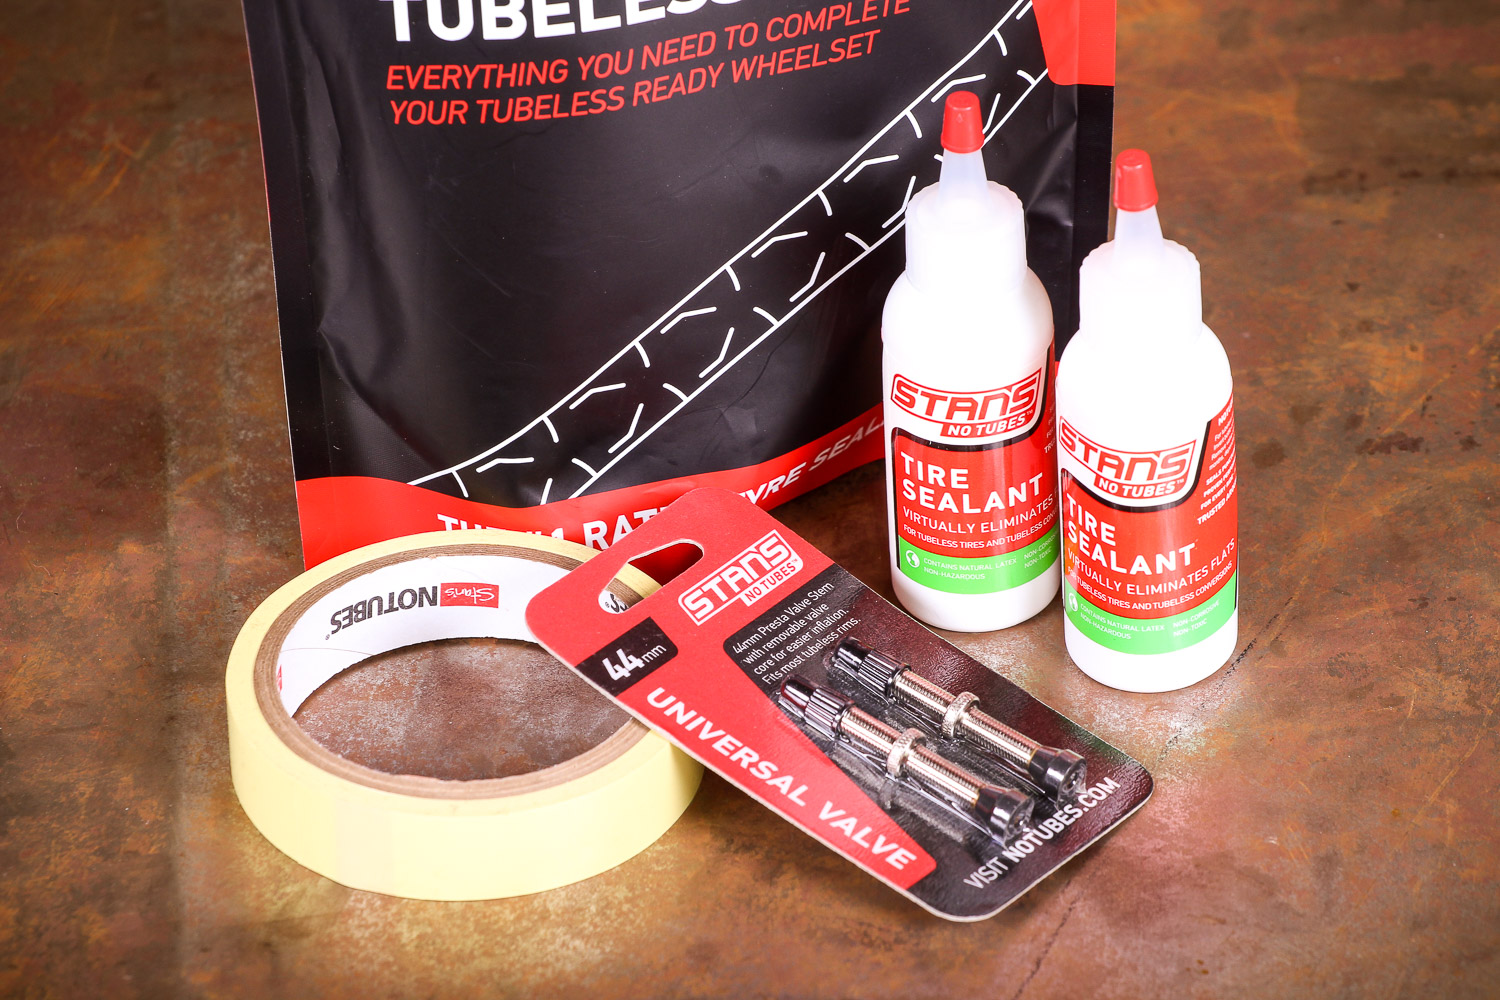 Stans No Tubes 25mm Wide Mountain Bike Cycle Tubeless Kit 170ML 35mm Valve 